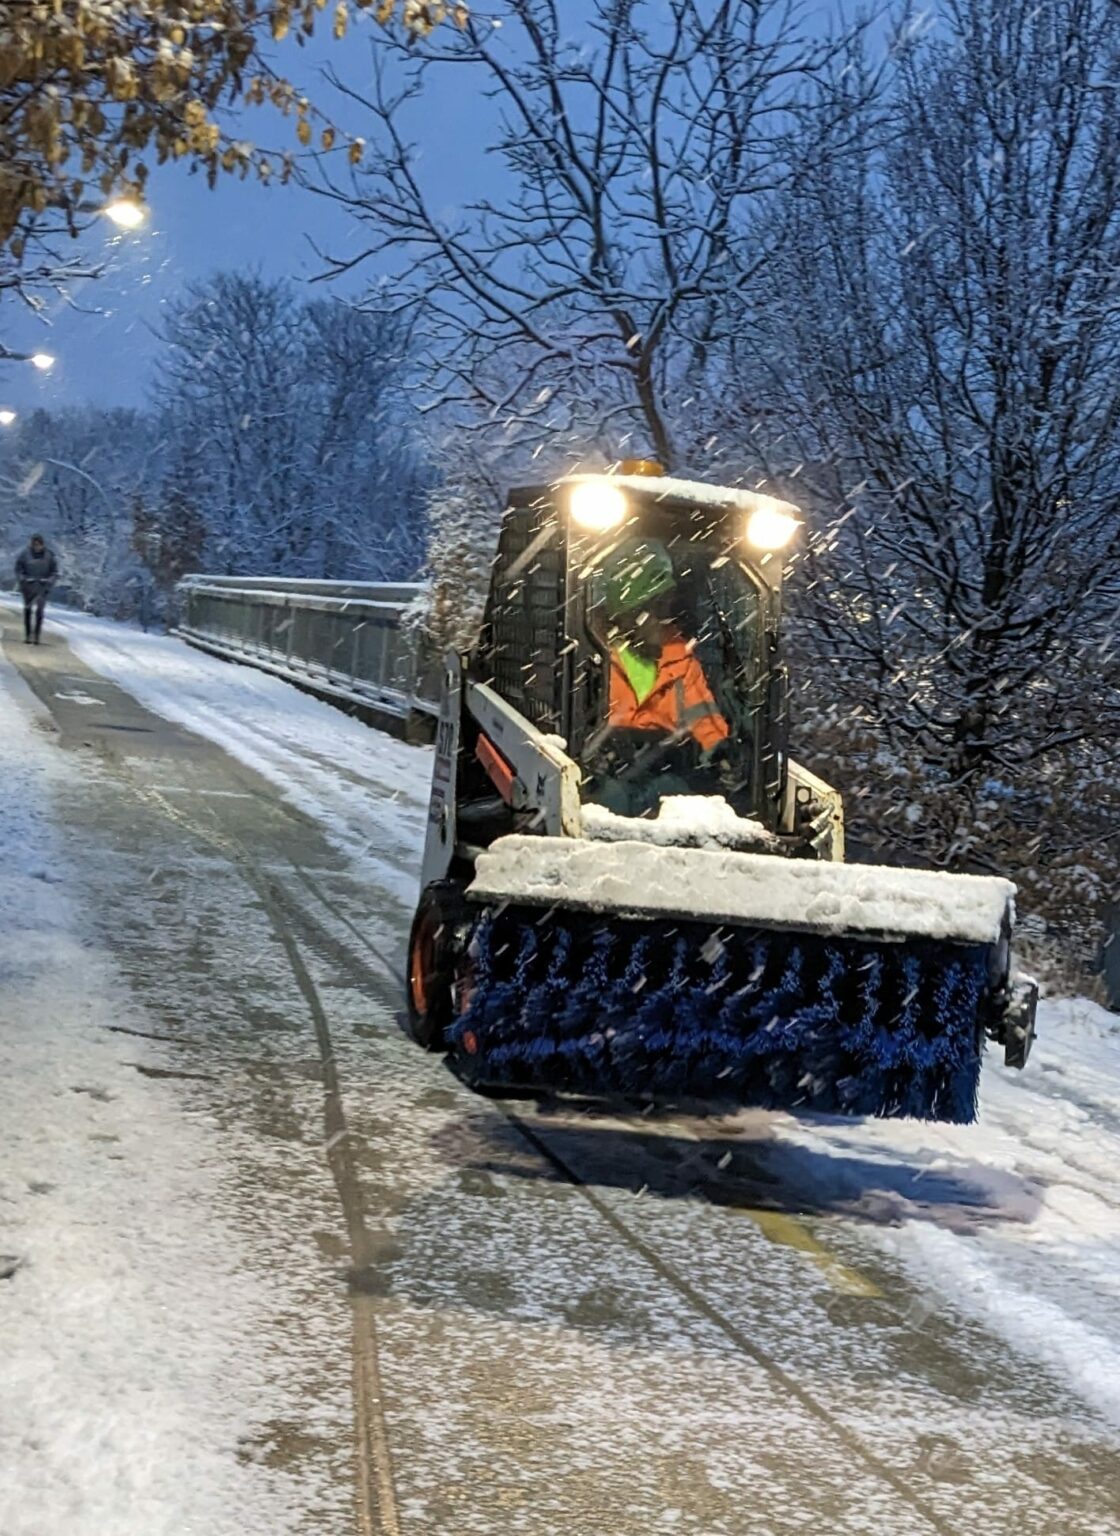 Worker with bright yellow safety vest drives a small snow plow vehicle on a snowy walkway.